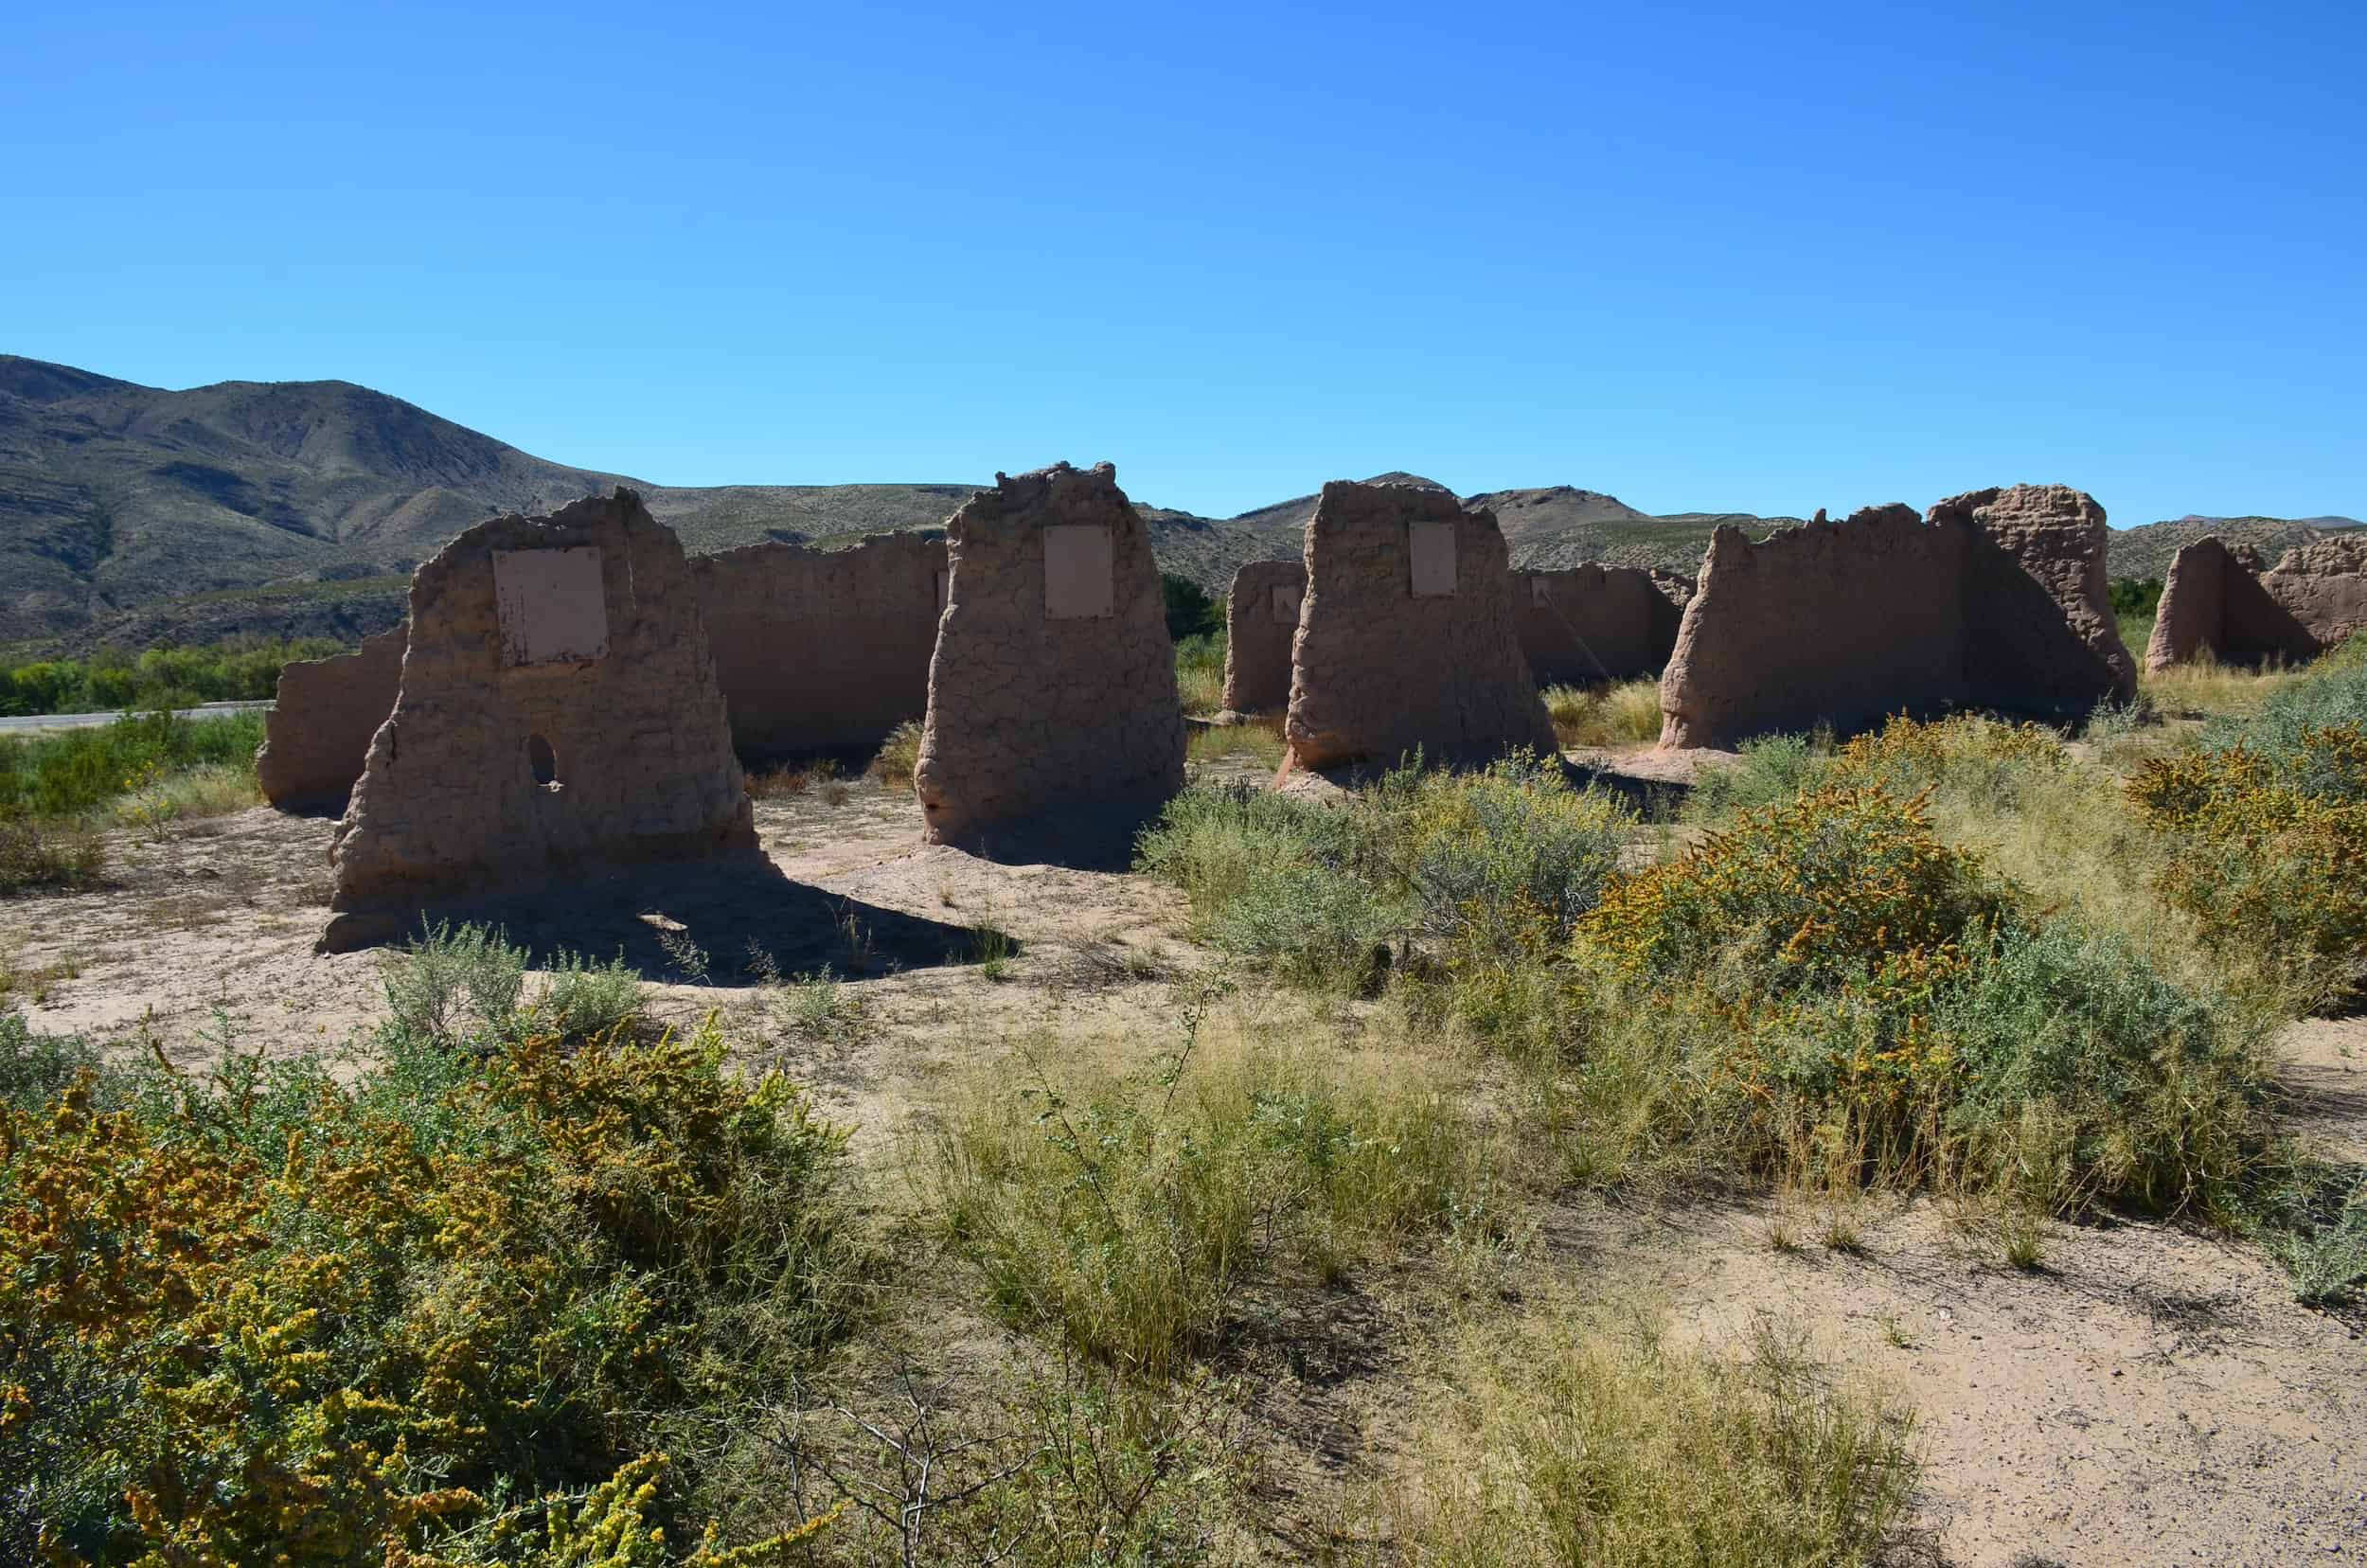 Ruins at Fort Selden Historic Site in New Mexico